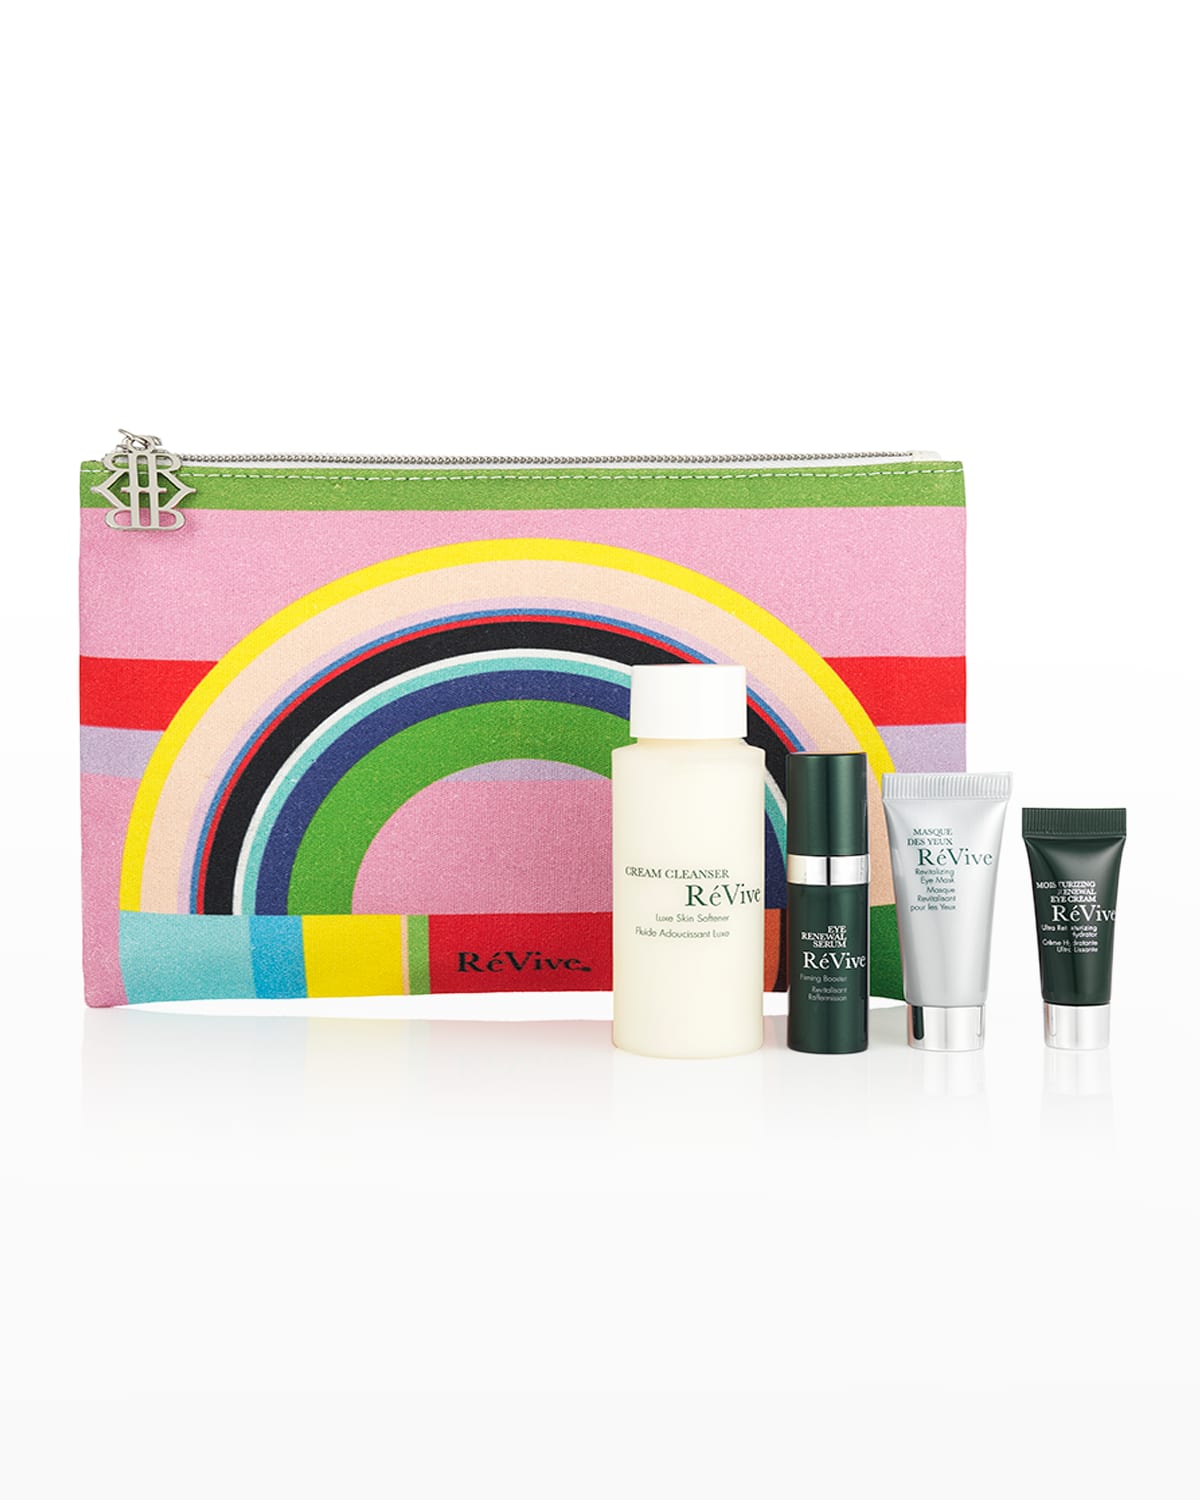 Eye Focus Gift Set, Yours with any $350 ReVive Purchase